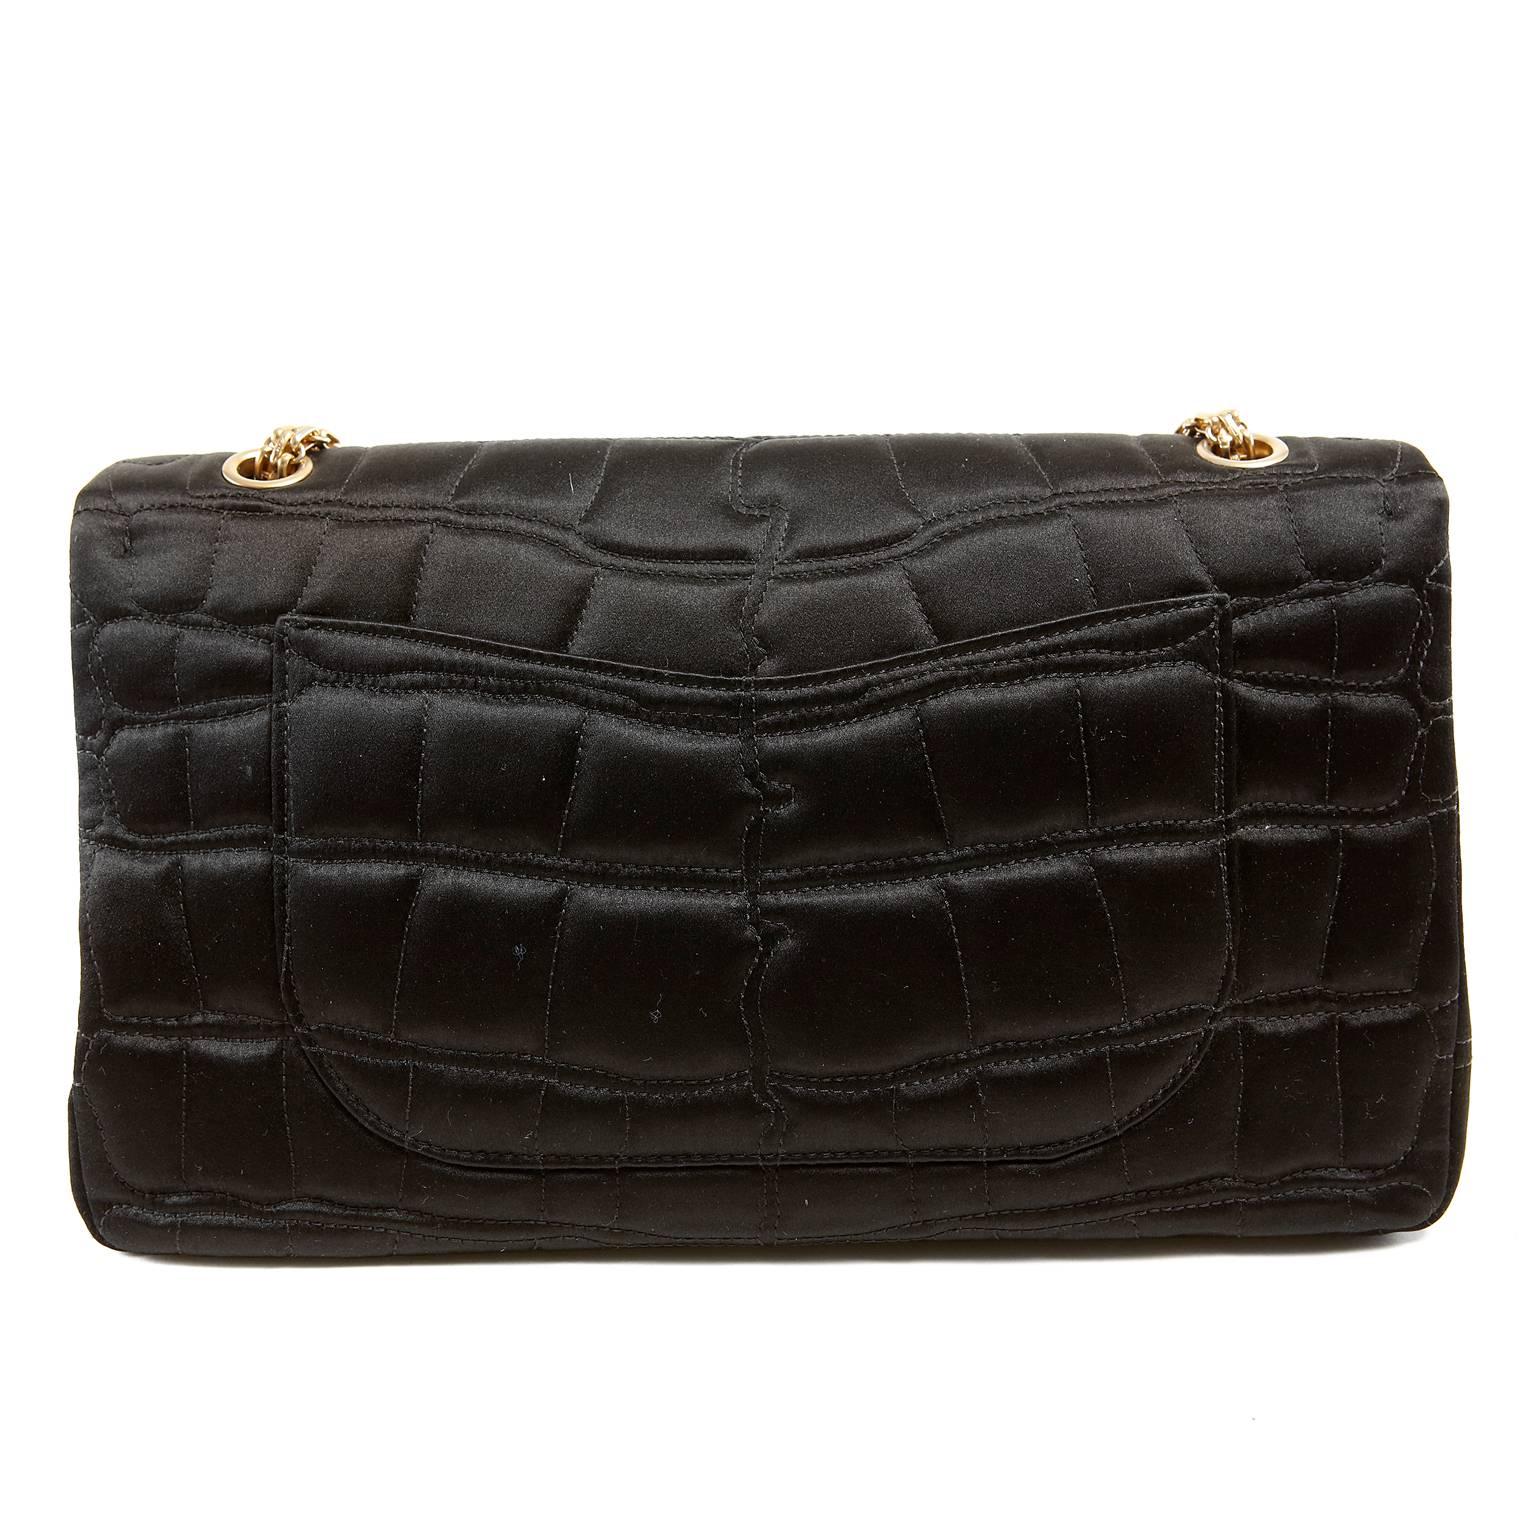 Chanel Black Satin Crocodile Quilted Reissue Flap Bag In Excellent Condition In Malibu, CA